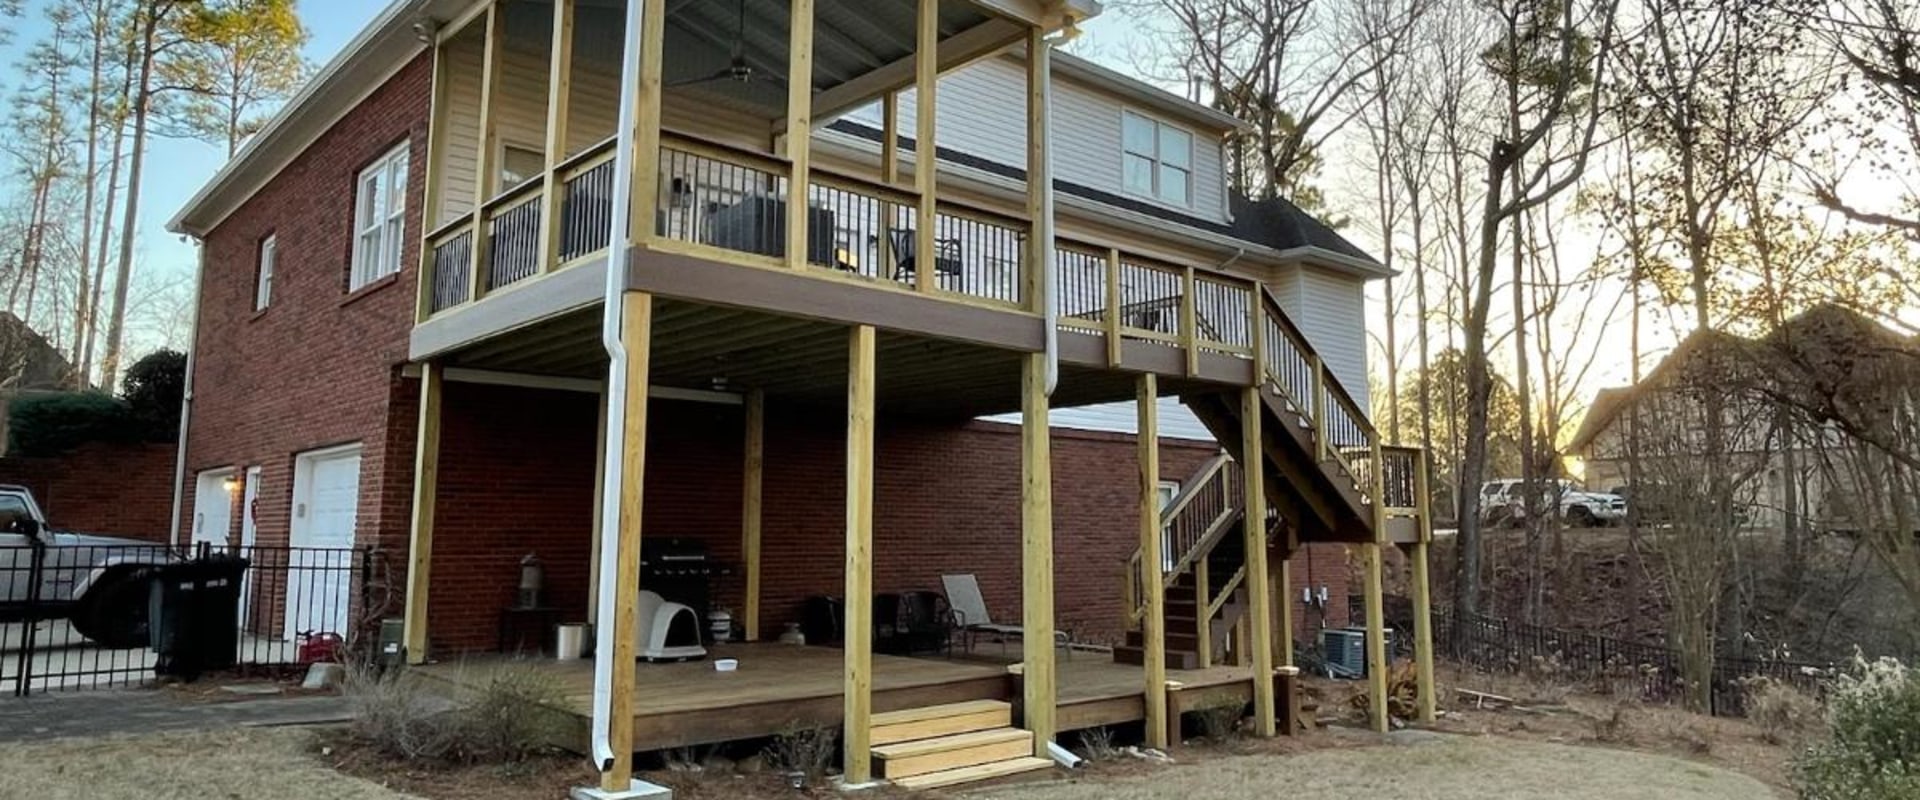 Replacing Damaged Boards: Improve Your Outdoor Living Space with Deck and Roof Renovations